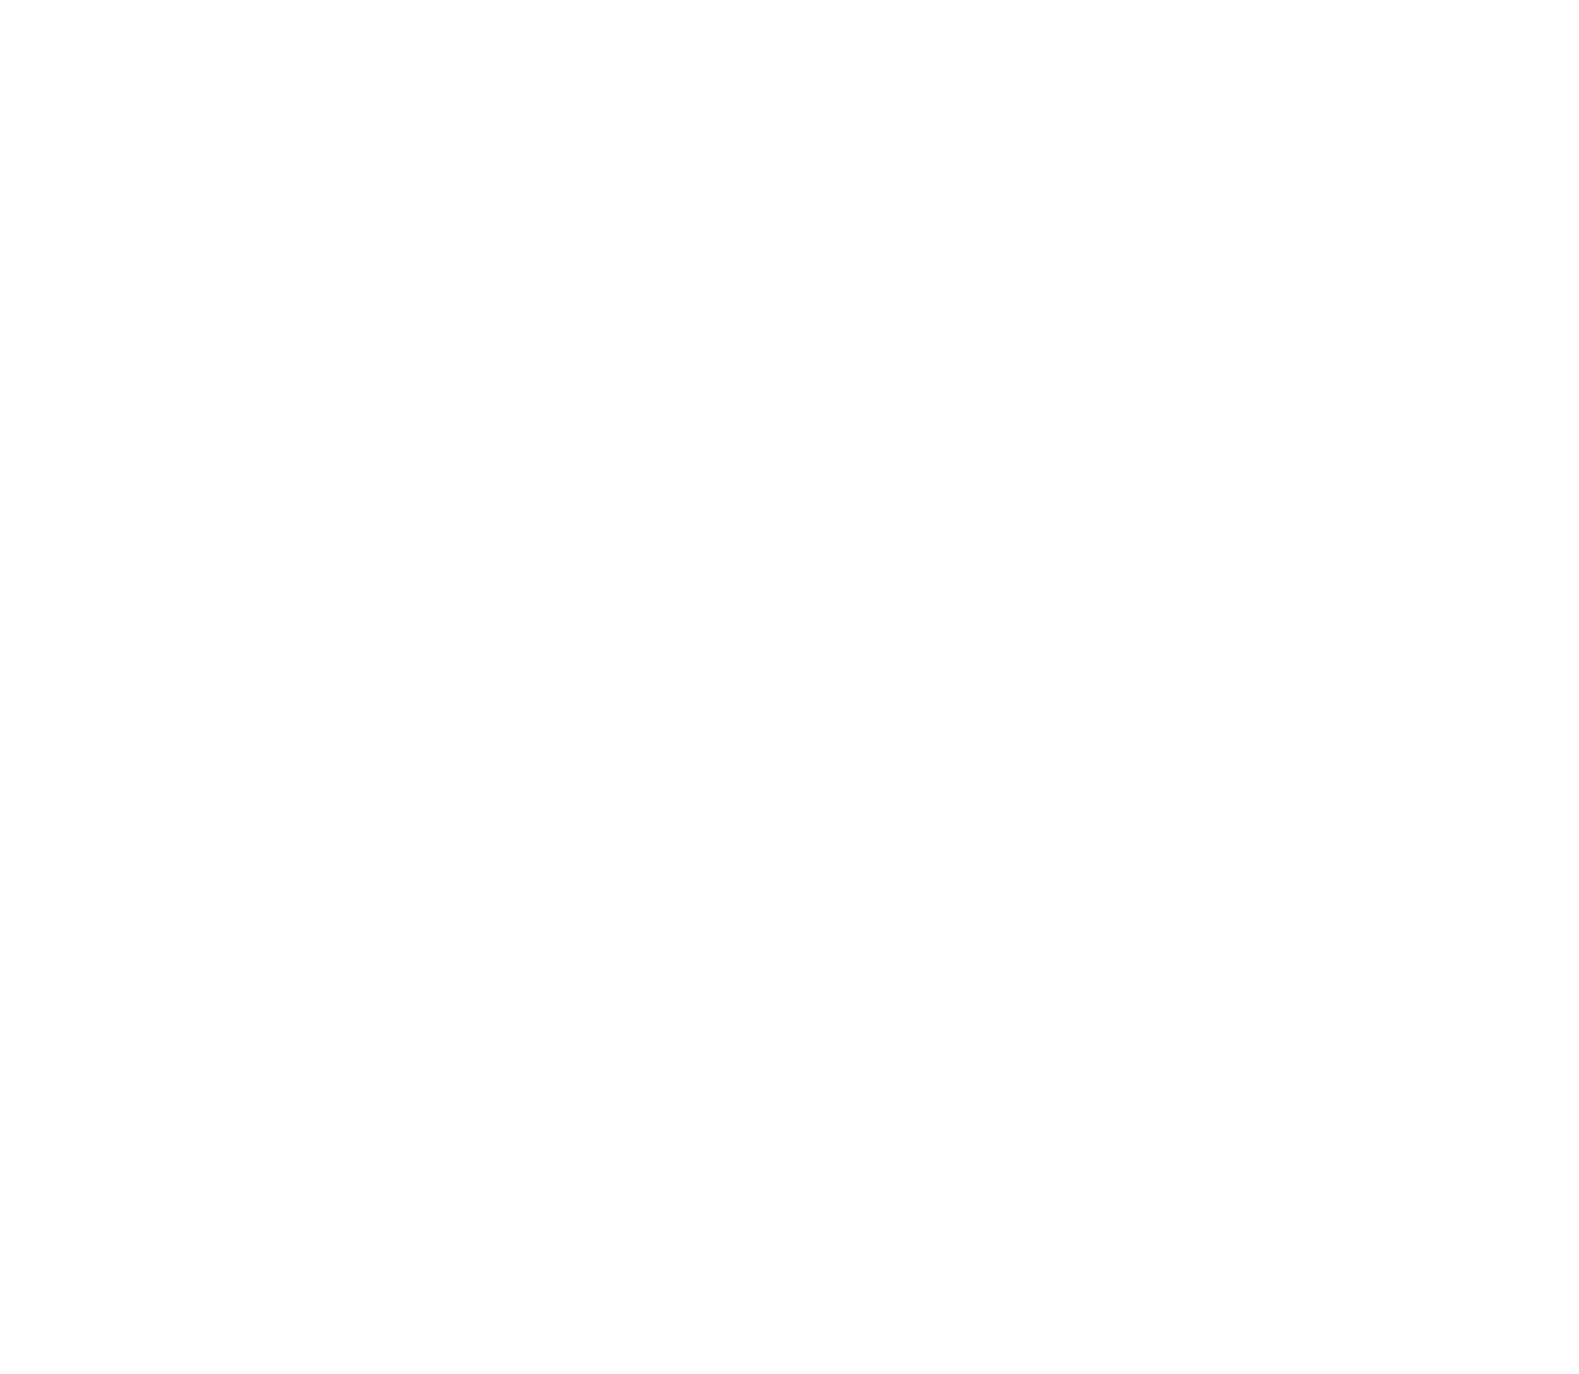 Vonage Holdings Corp. logo for dark backgrounds (transparent PNG)